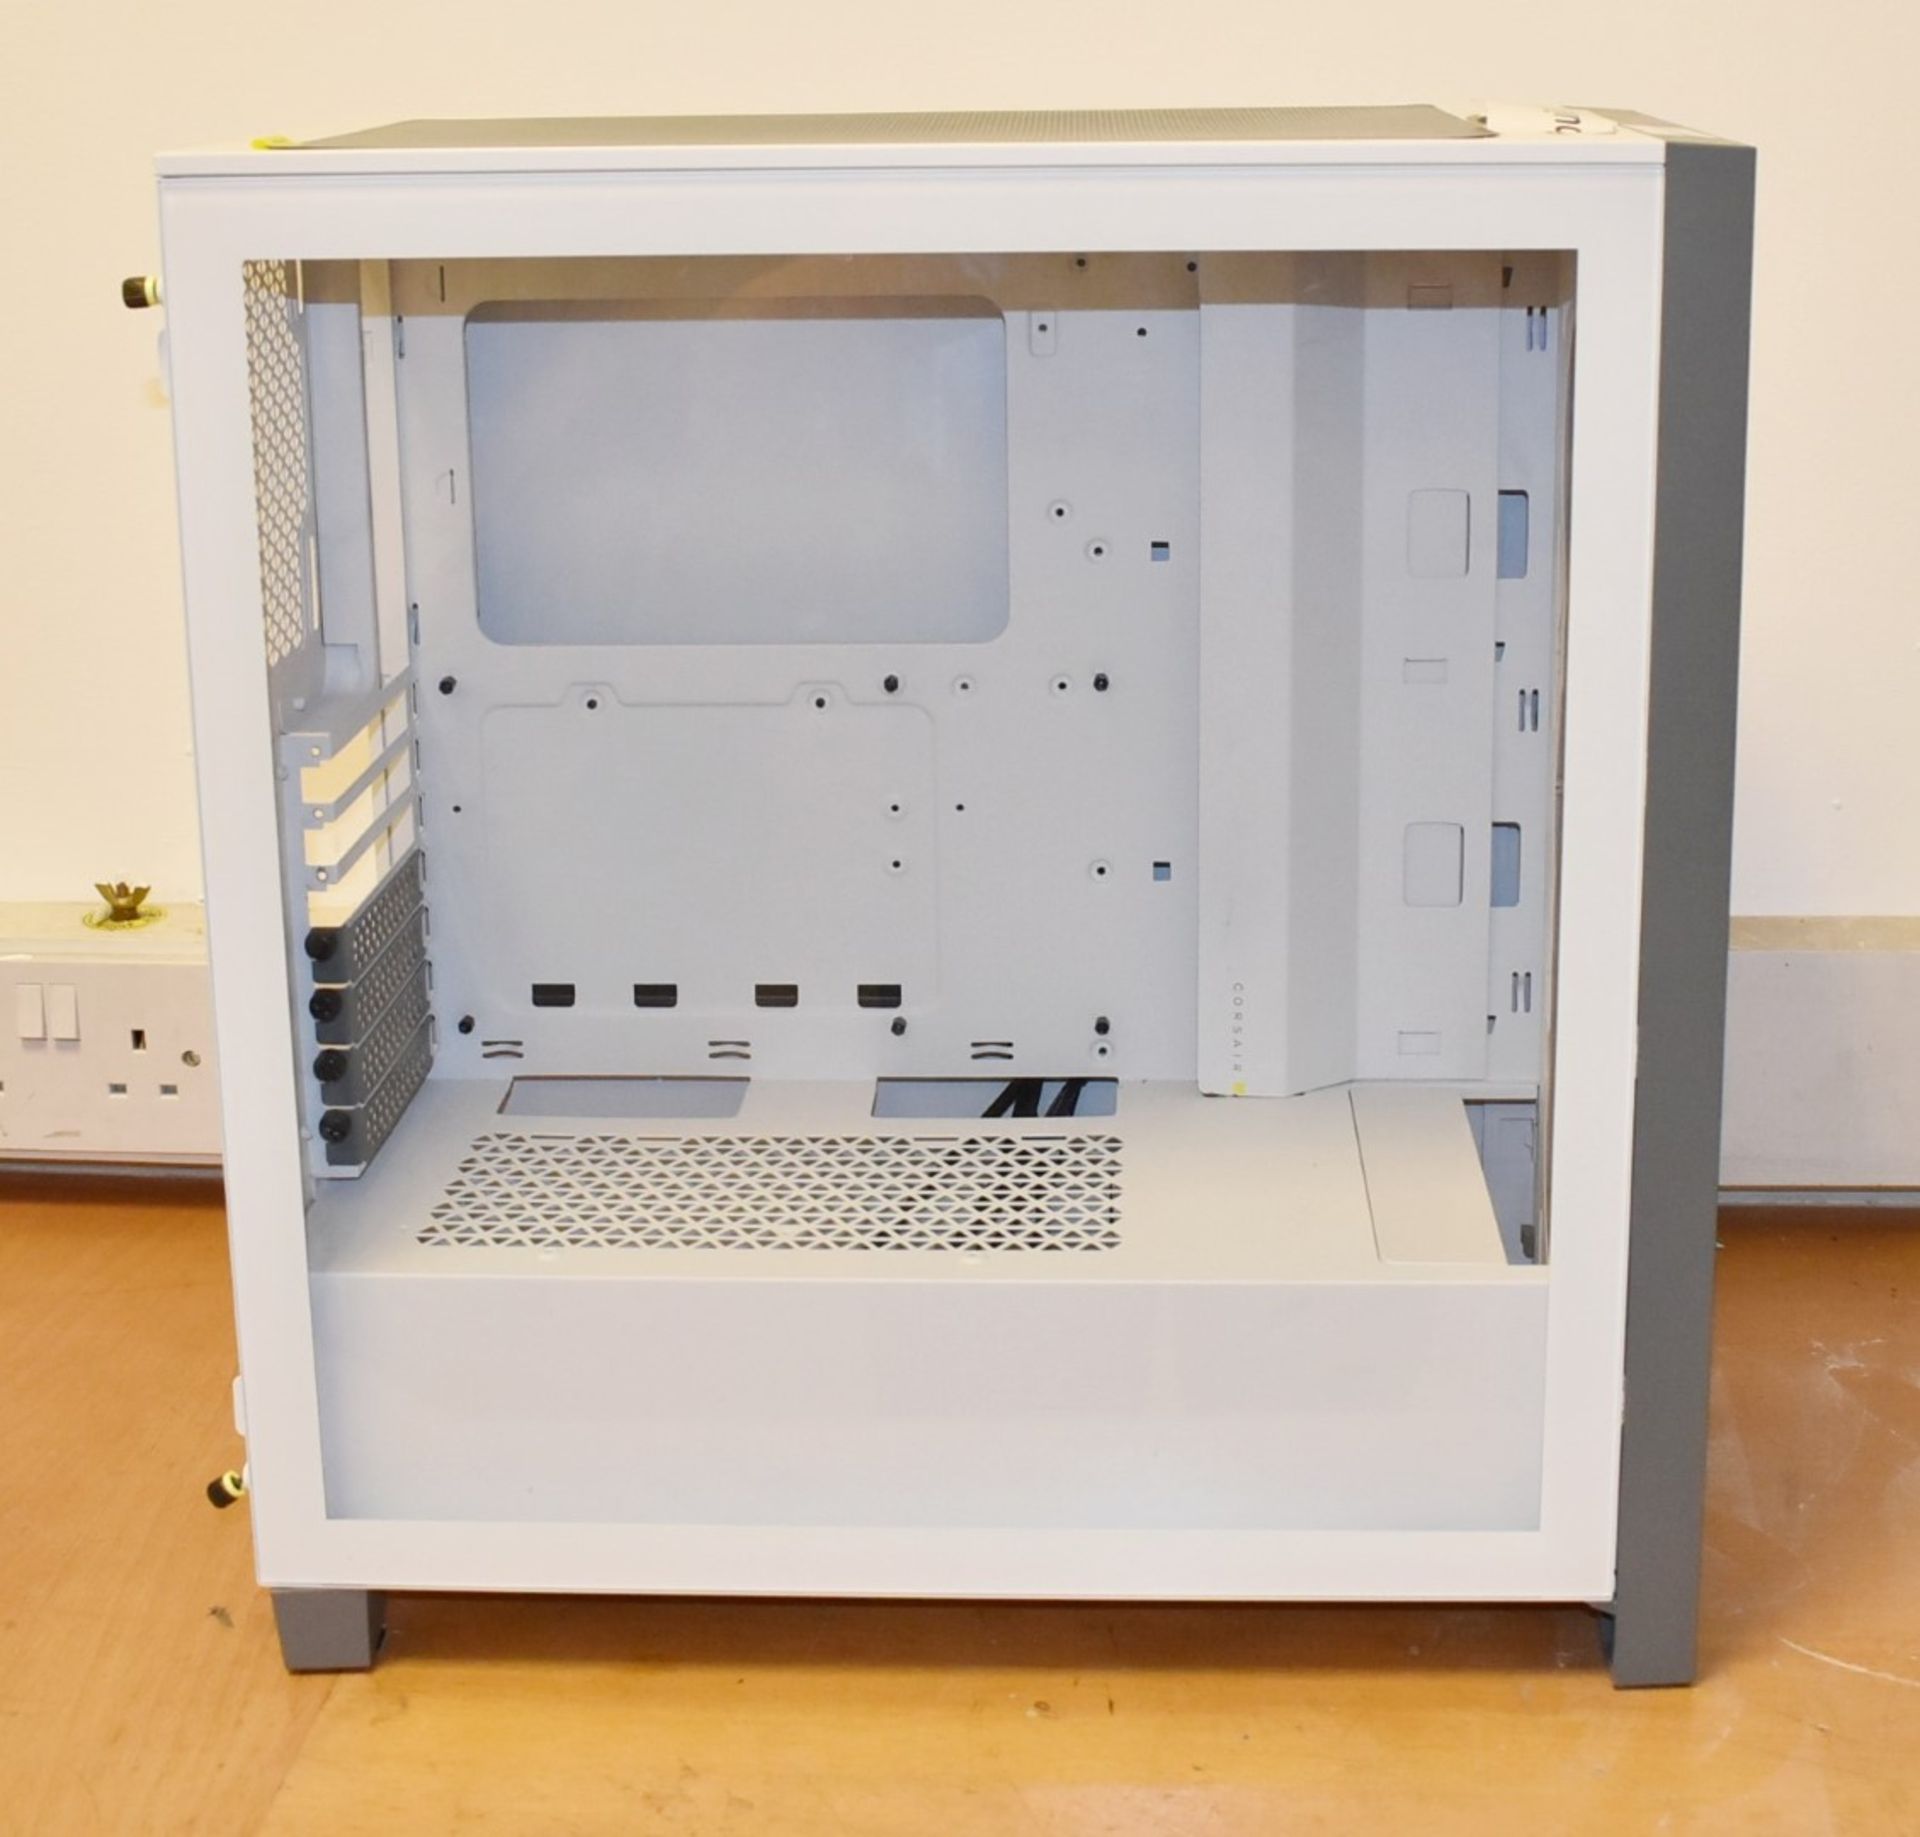 1 x Corsair Desktop PC Gaming Case With Tempered Glass Side Panel - Artic White Finish - Unboxed - Image 5 of 7